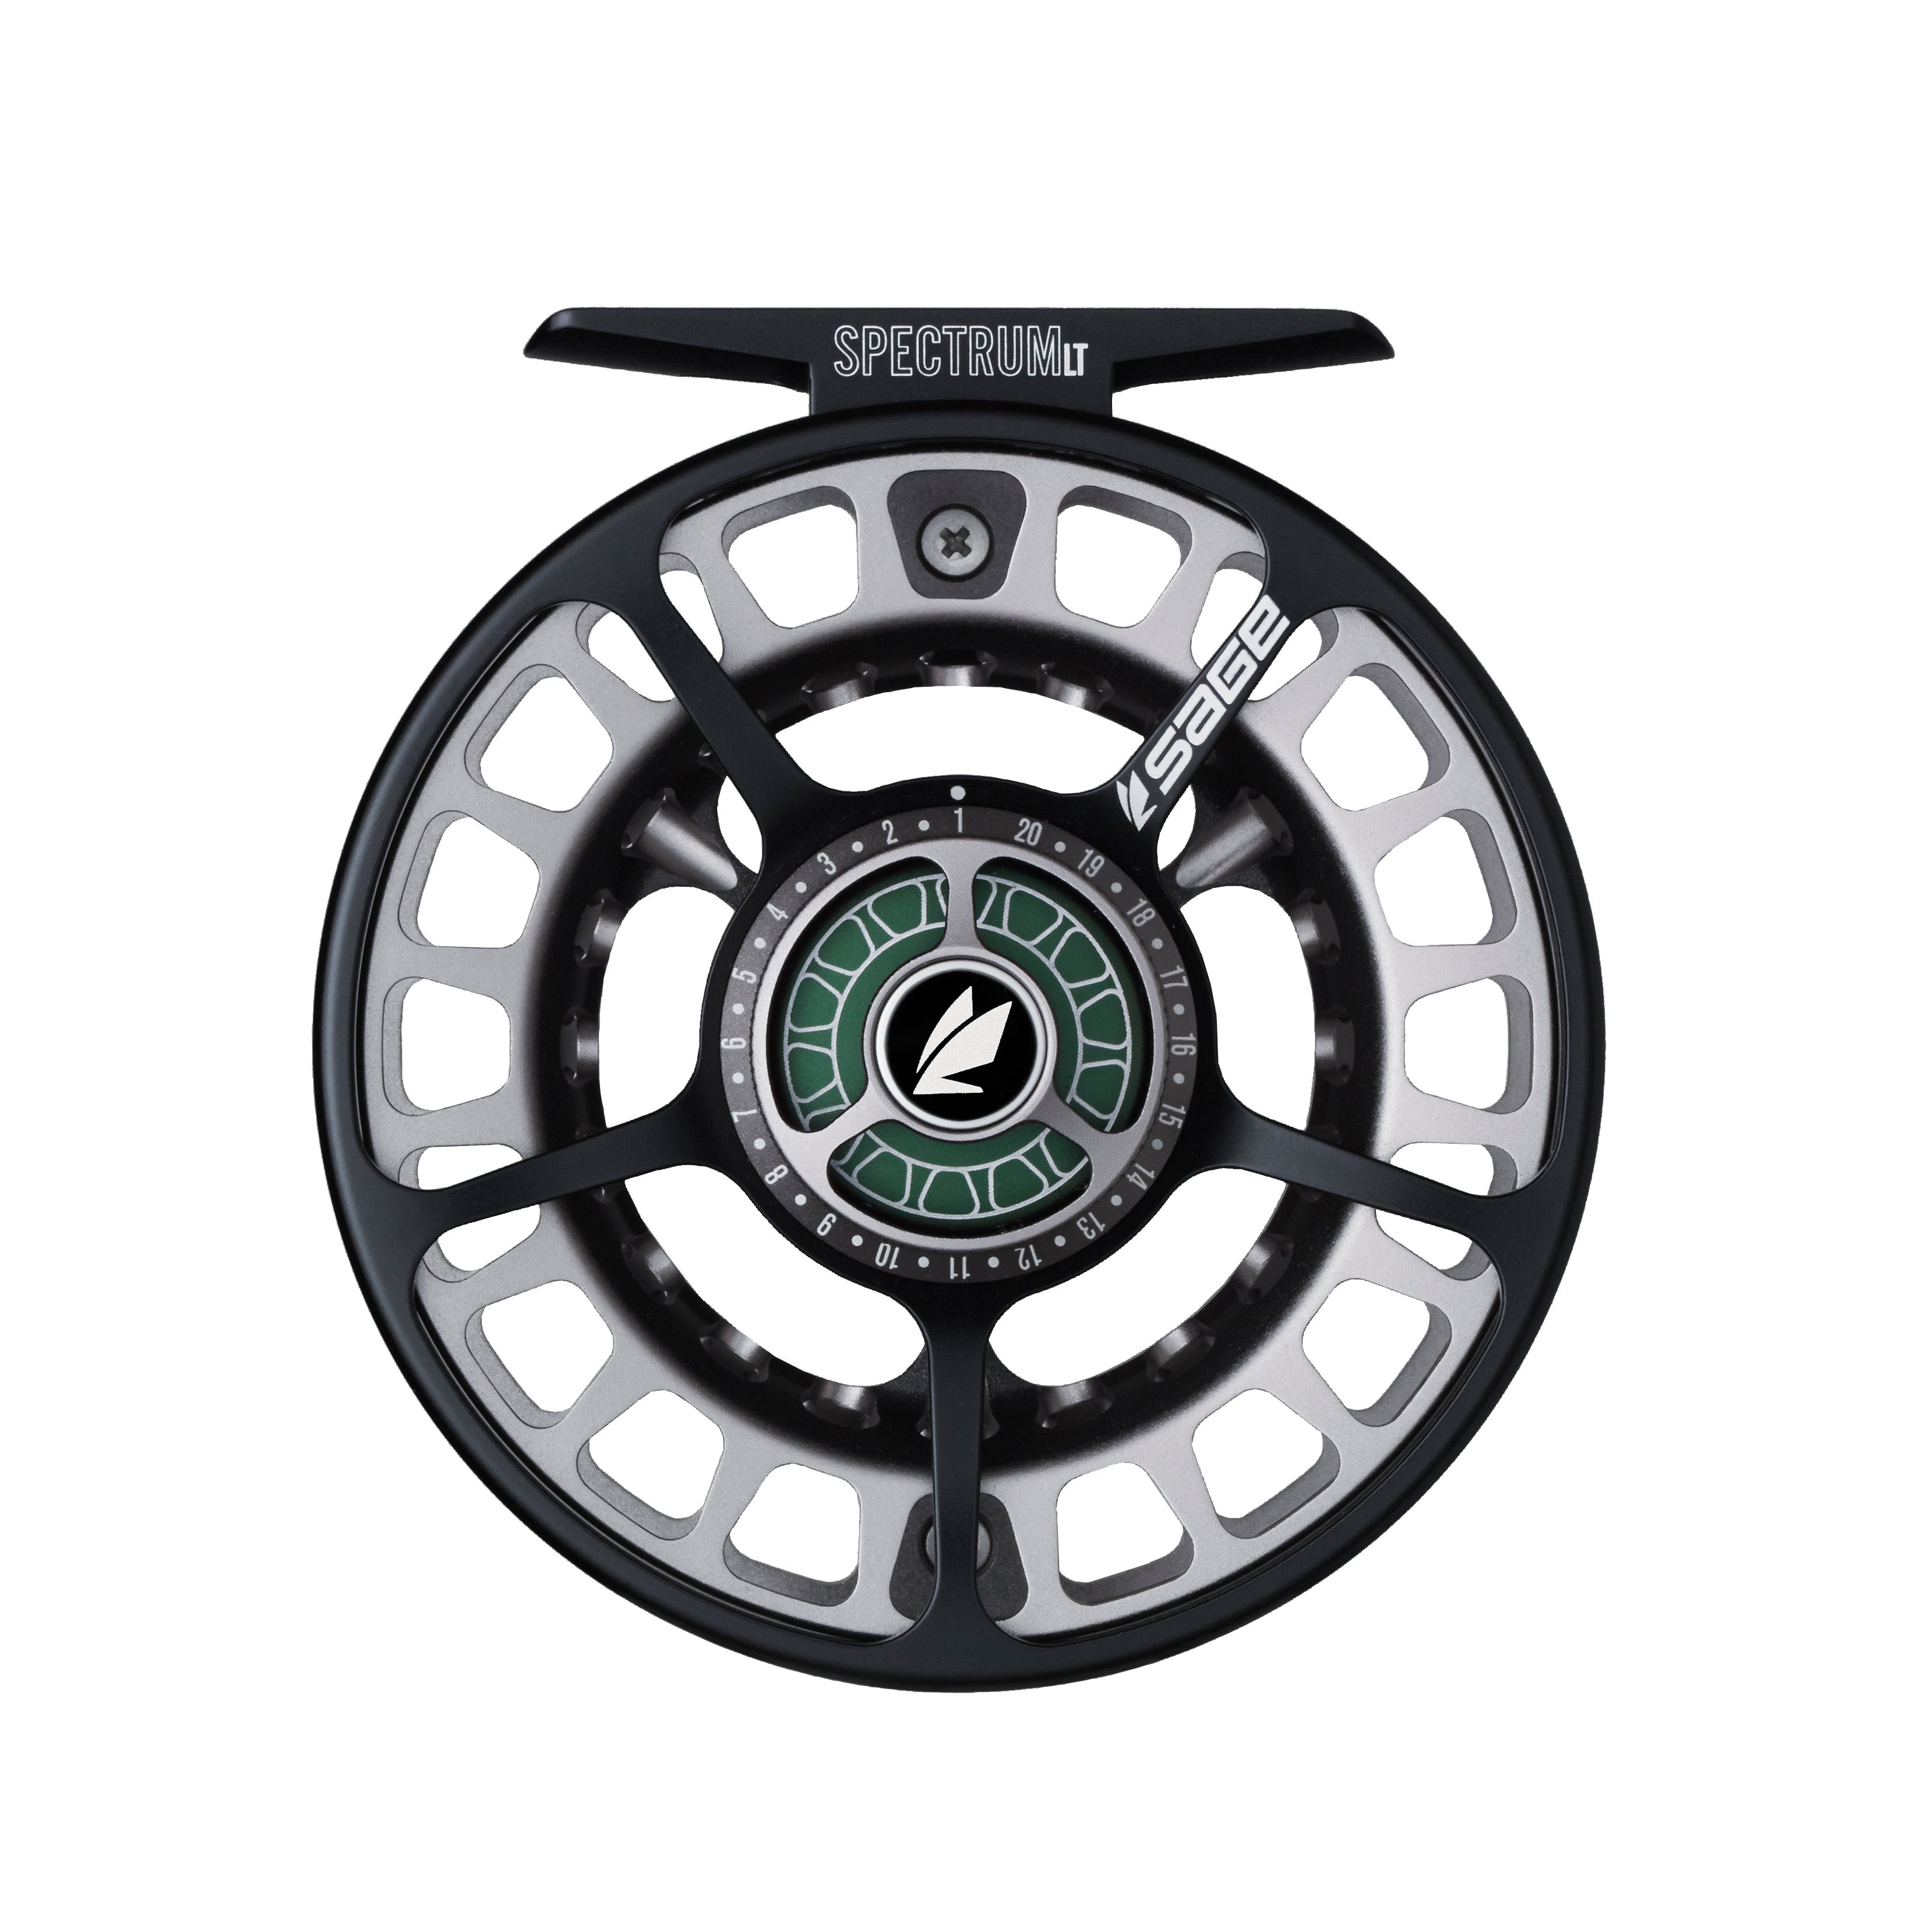 3wt 7'6 Rogue Edition with Qualifly Maverick 2/3 reel floating